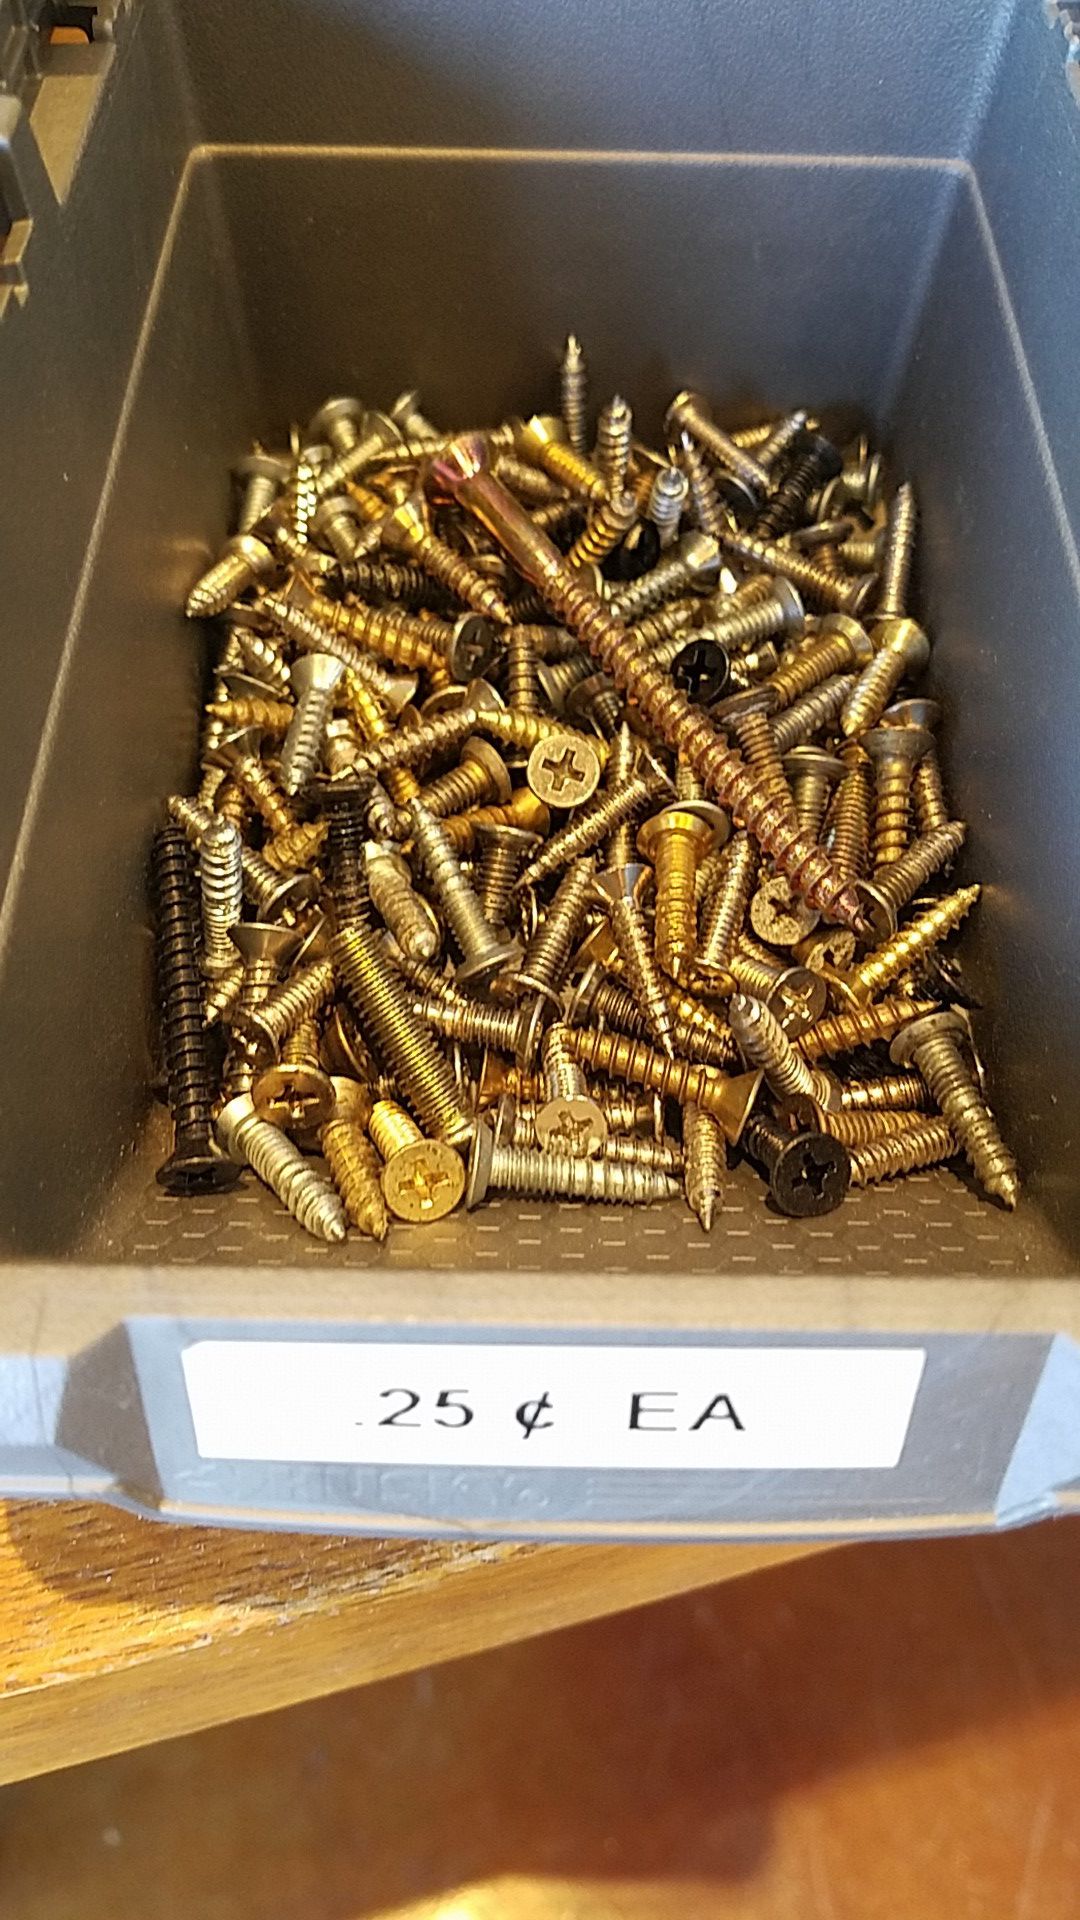 Miscellaneous screws and lock